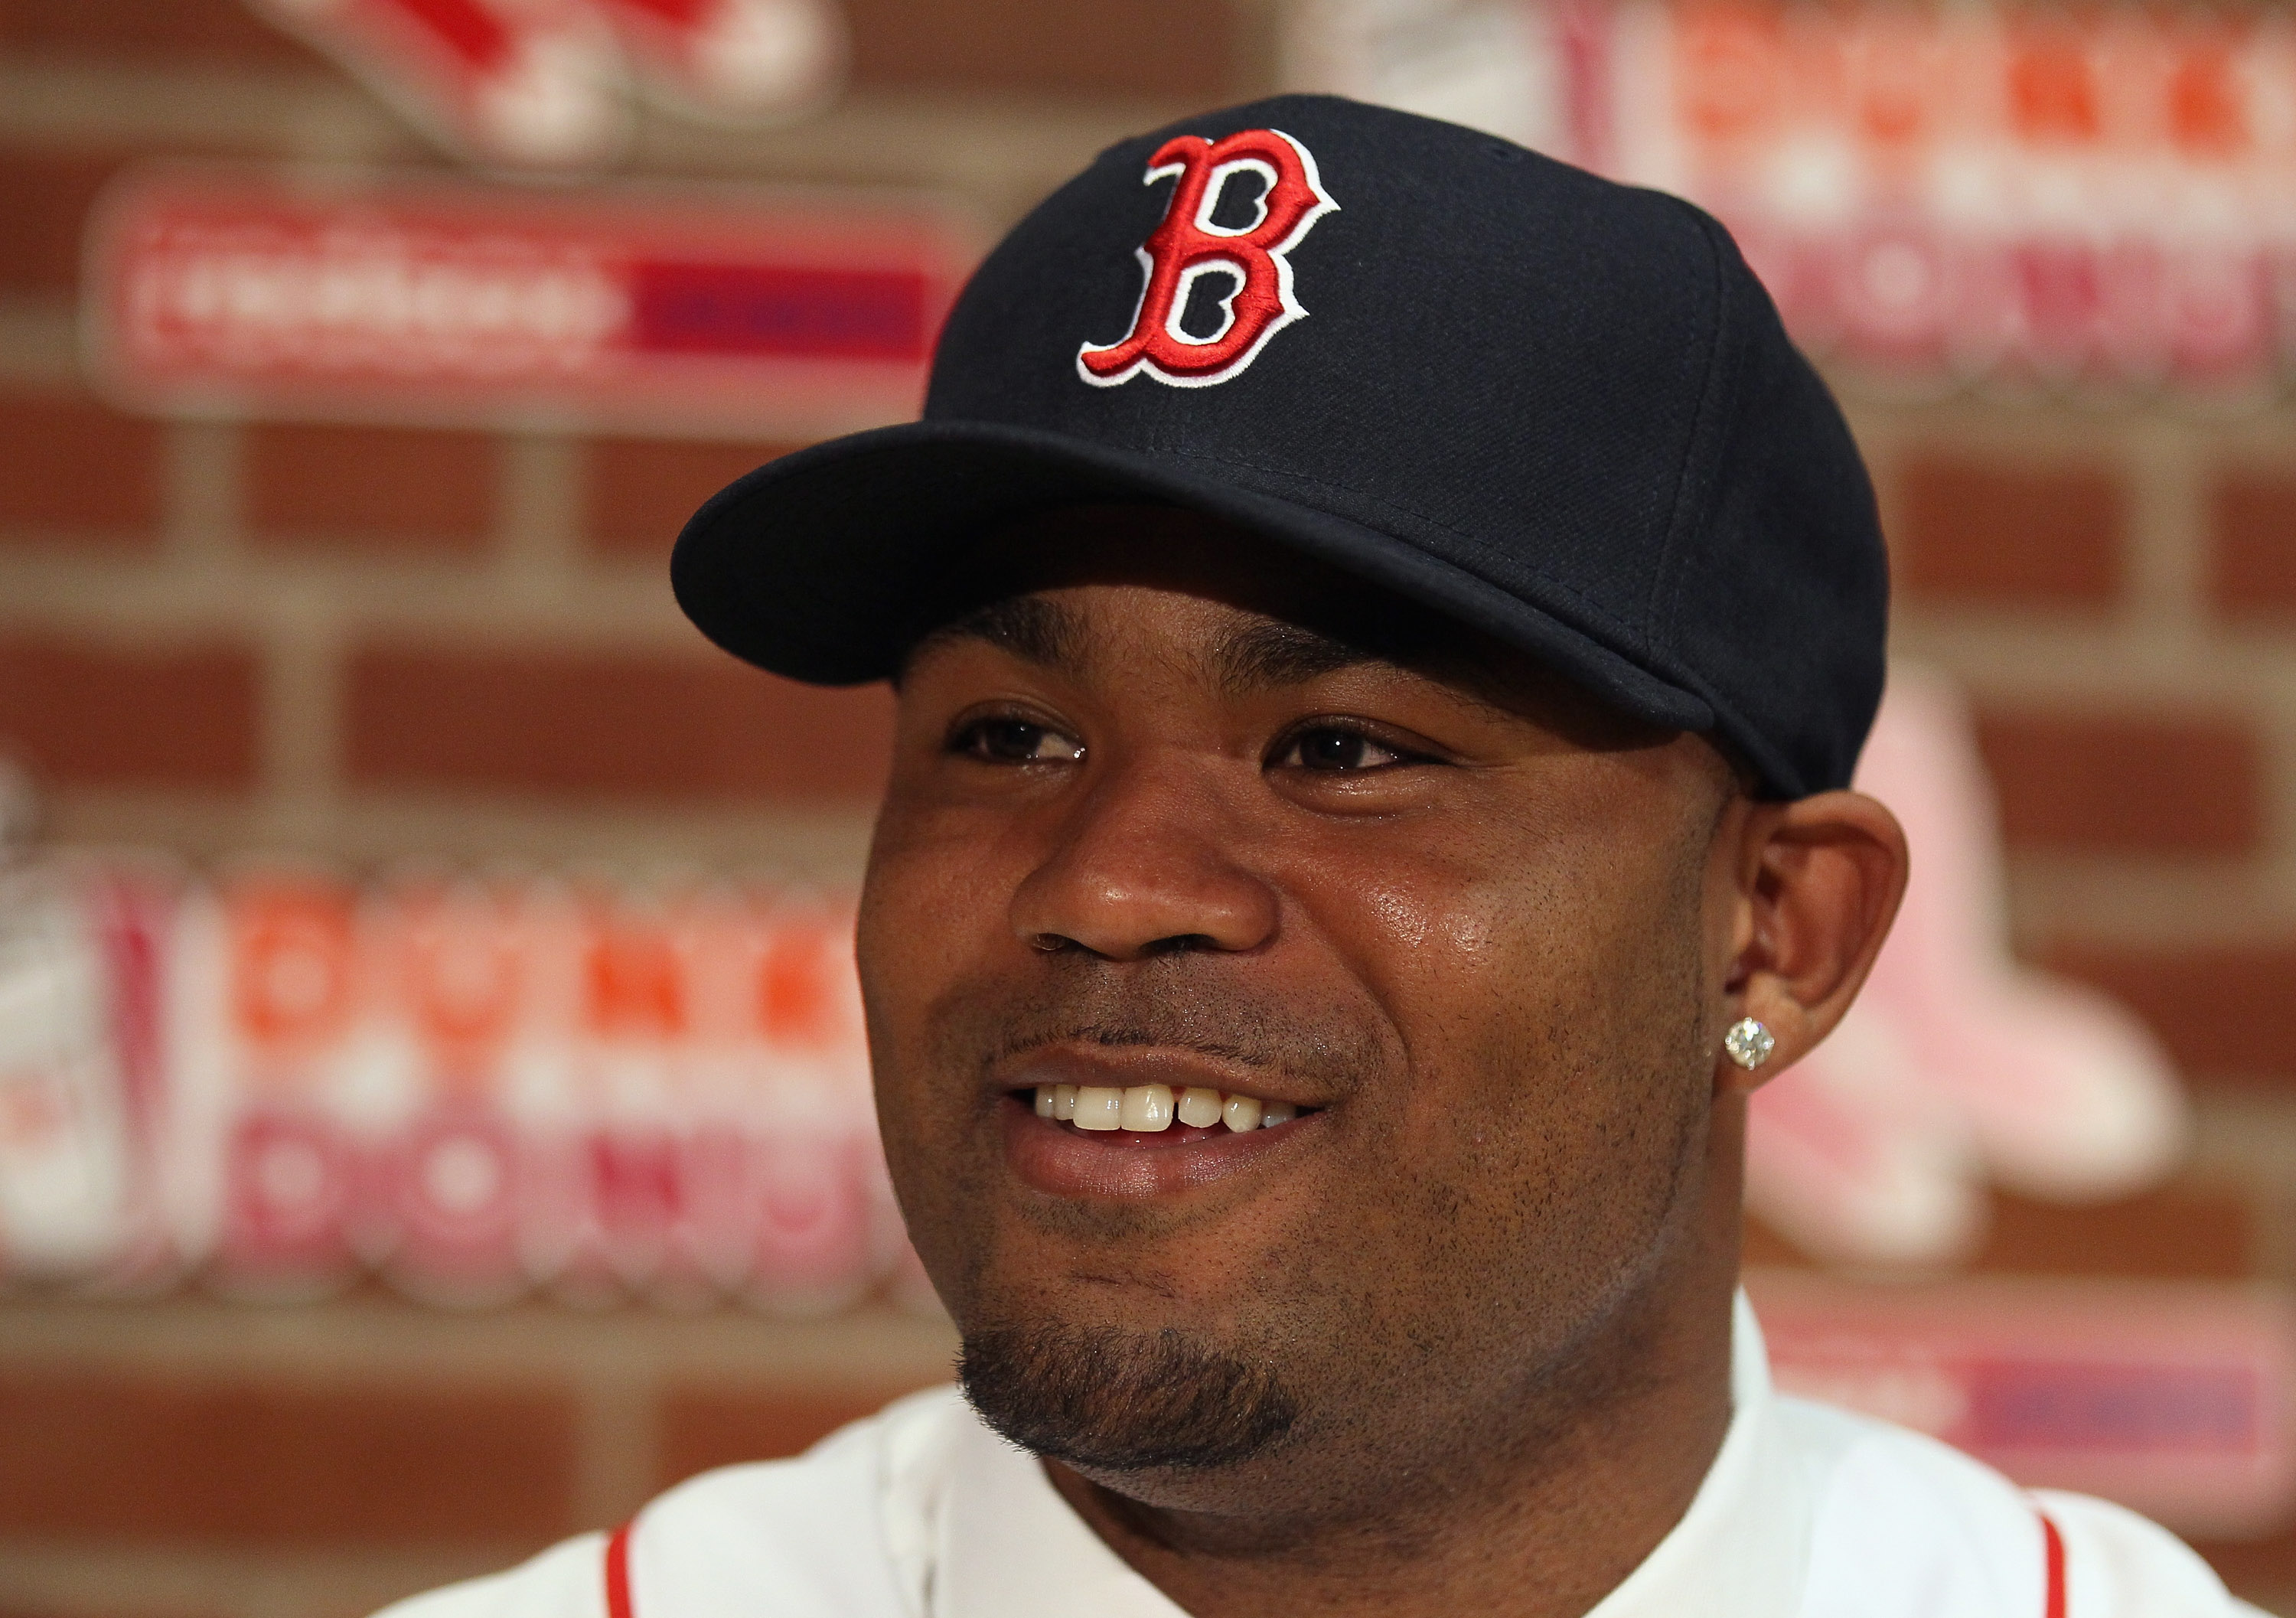 MLB Free Agents: Is Carl Crawford a Good Fit for the Boston Red